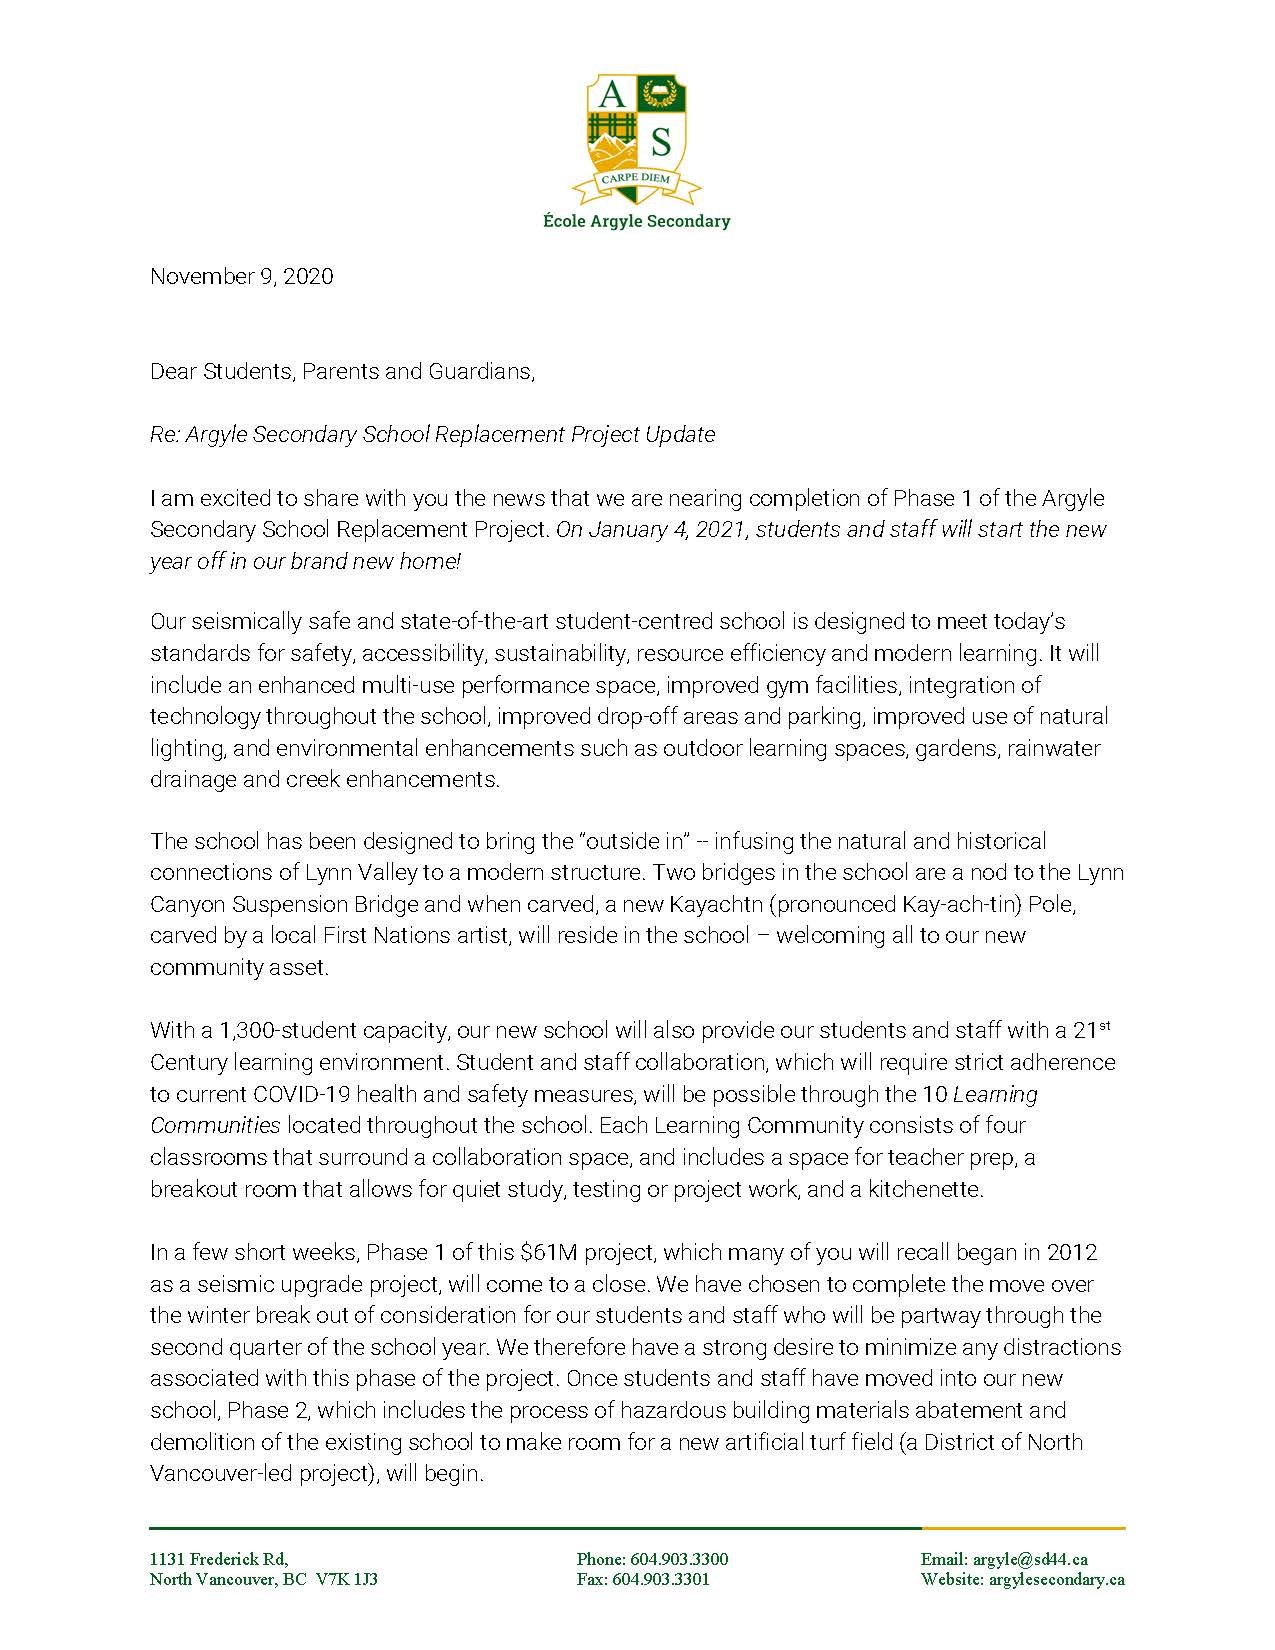 Argyle Replacement Project Update_Letter to Community_11092020_Page_1.jpg